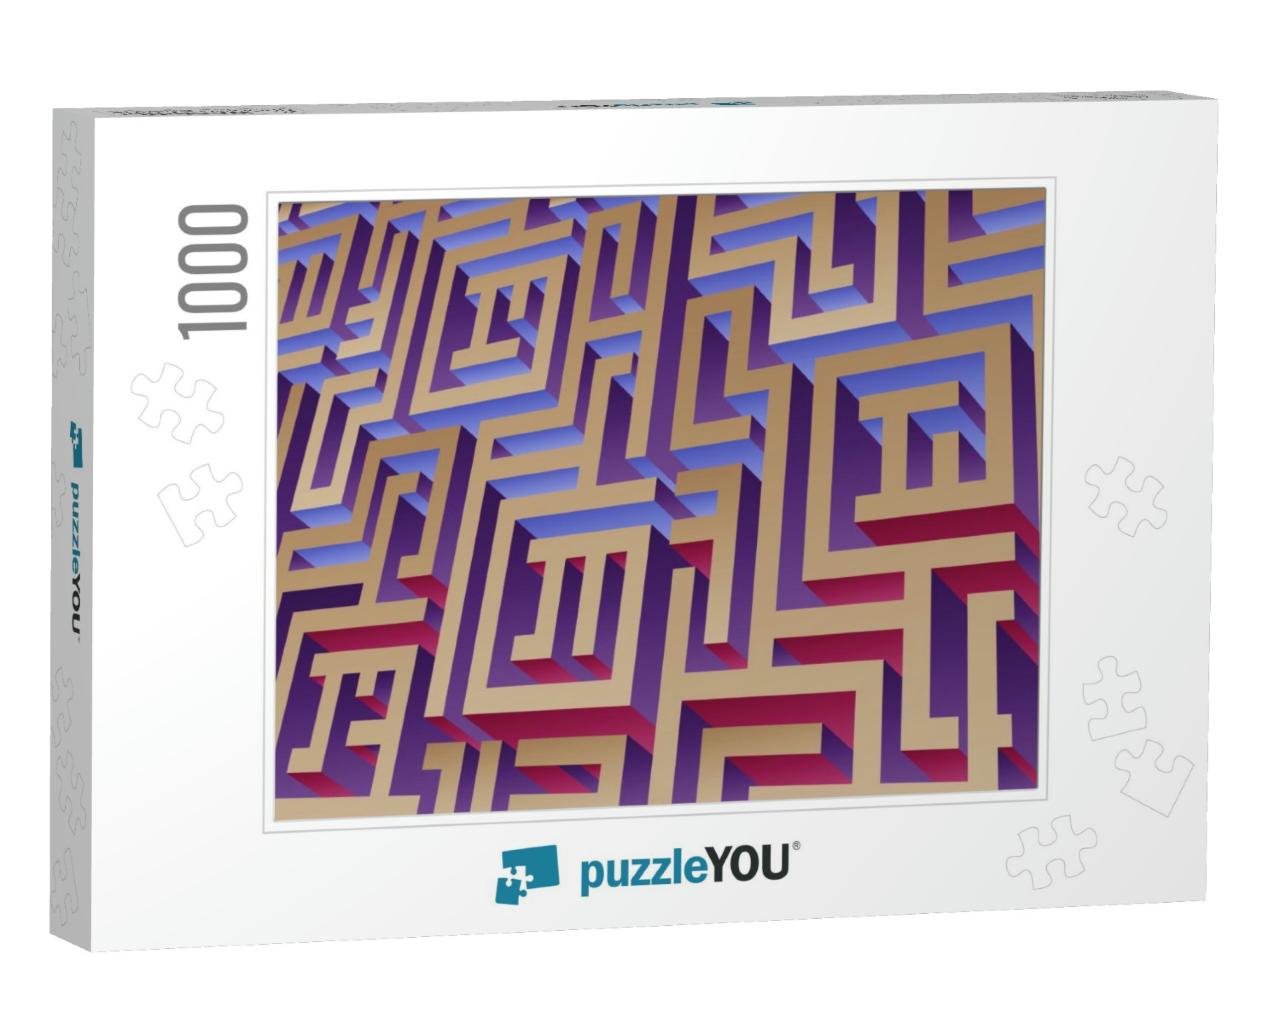 Maze Background, 3D Rendering, Isometric Perspective. in... Jigsaw Puzzle with 1000 pieces